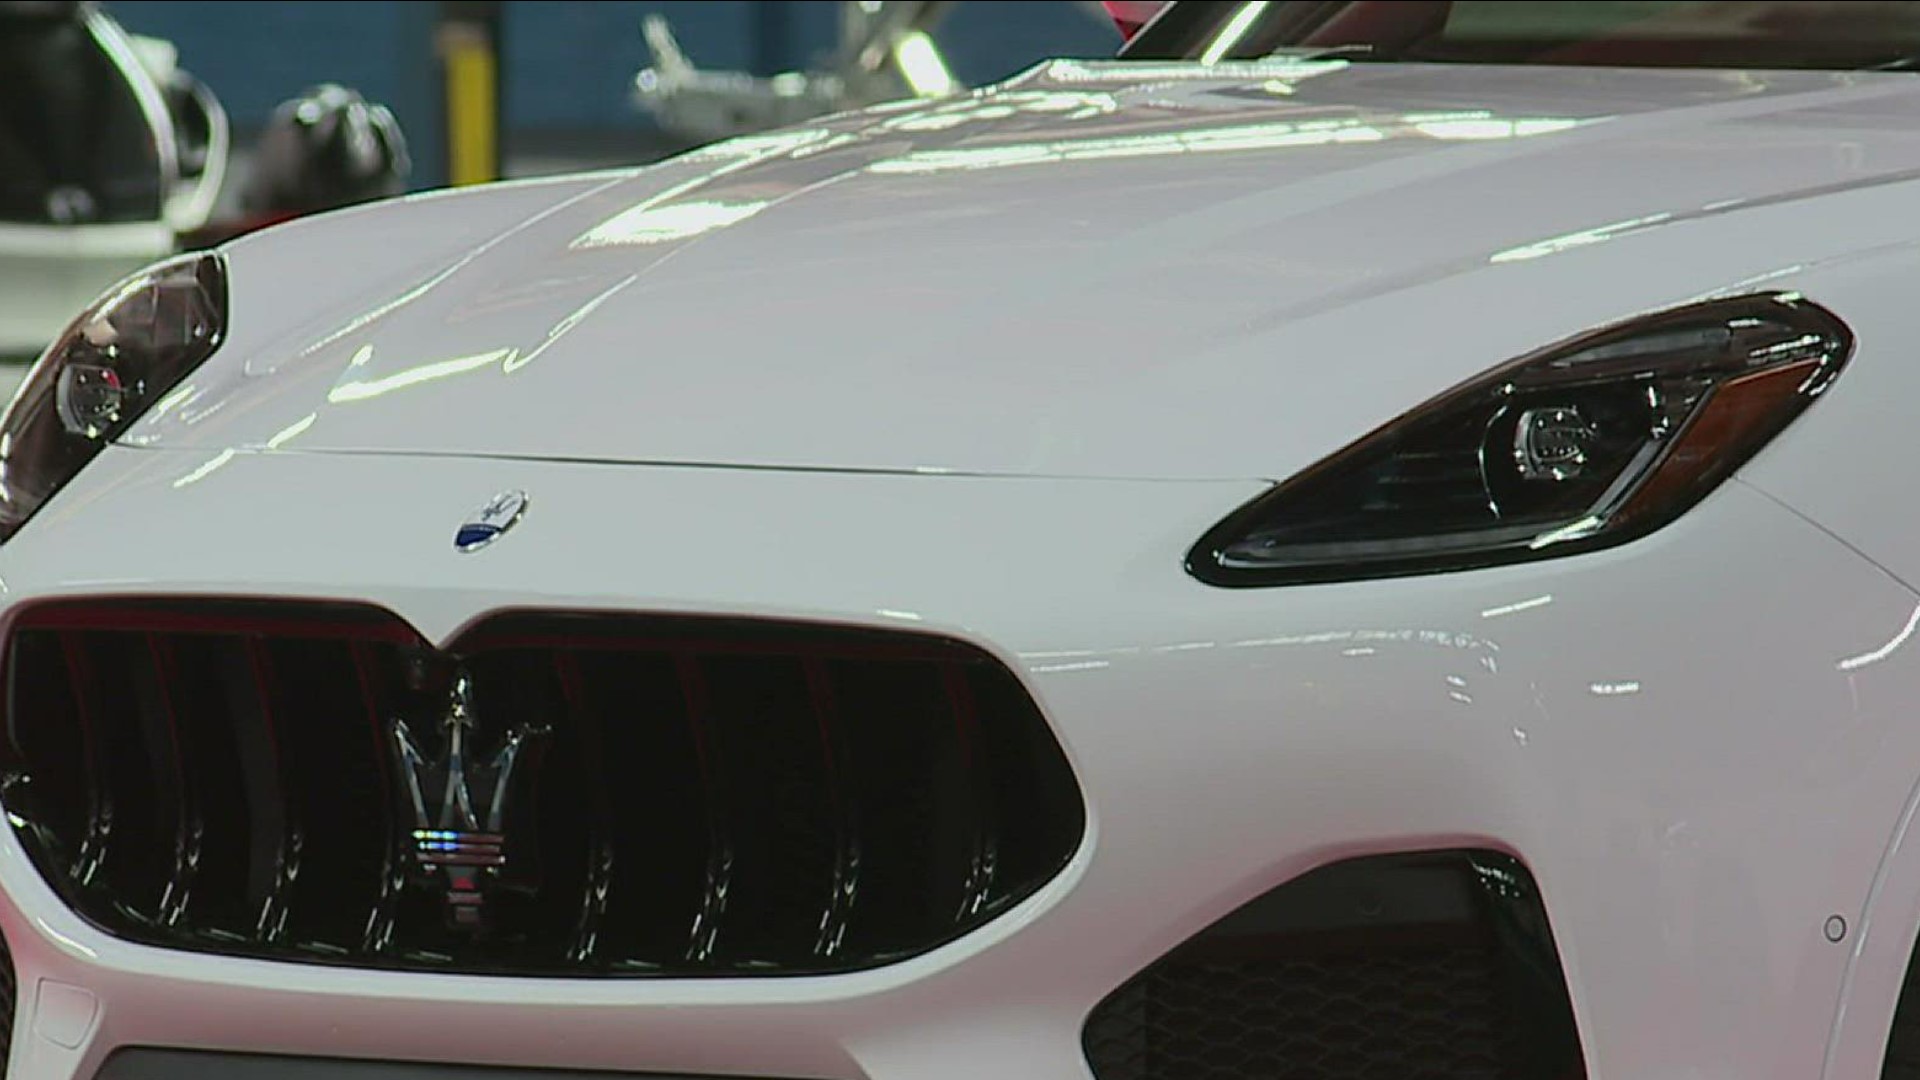 After a two-year hiatus, the Auto Show is back, featuring more than 30 manufactures showcasing the latest cars, trucks and SUVs.